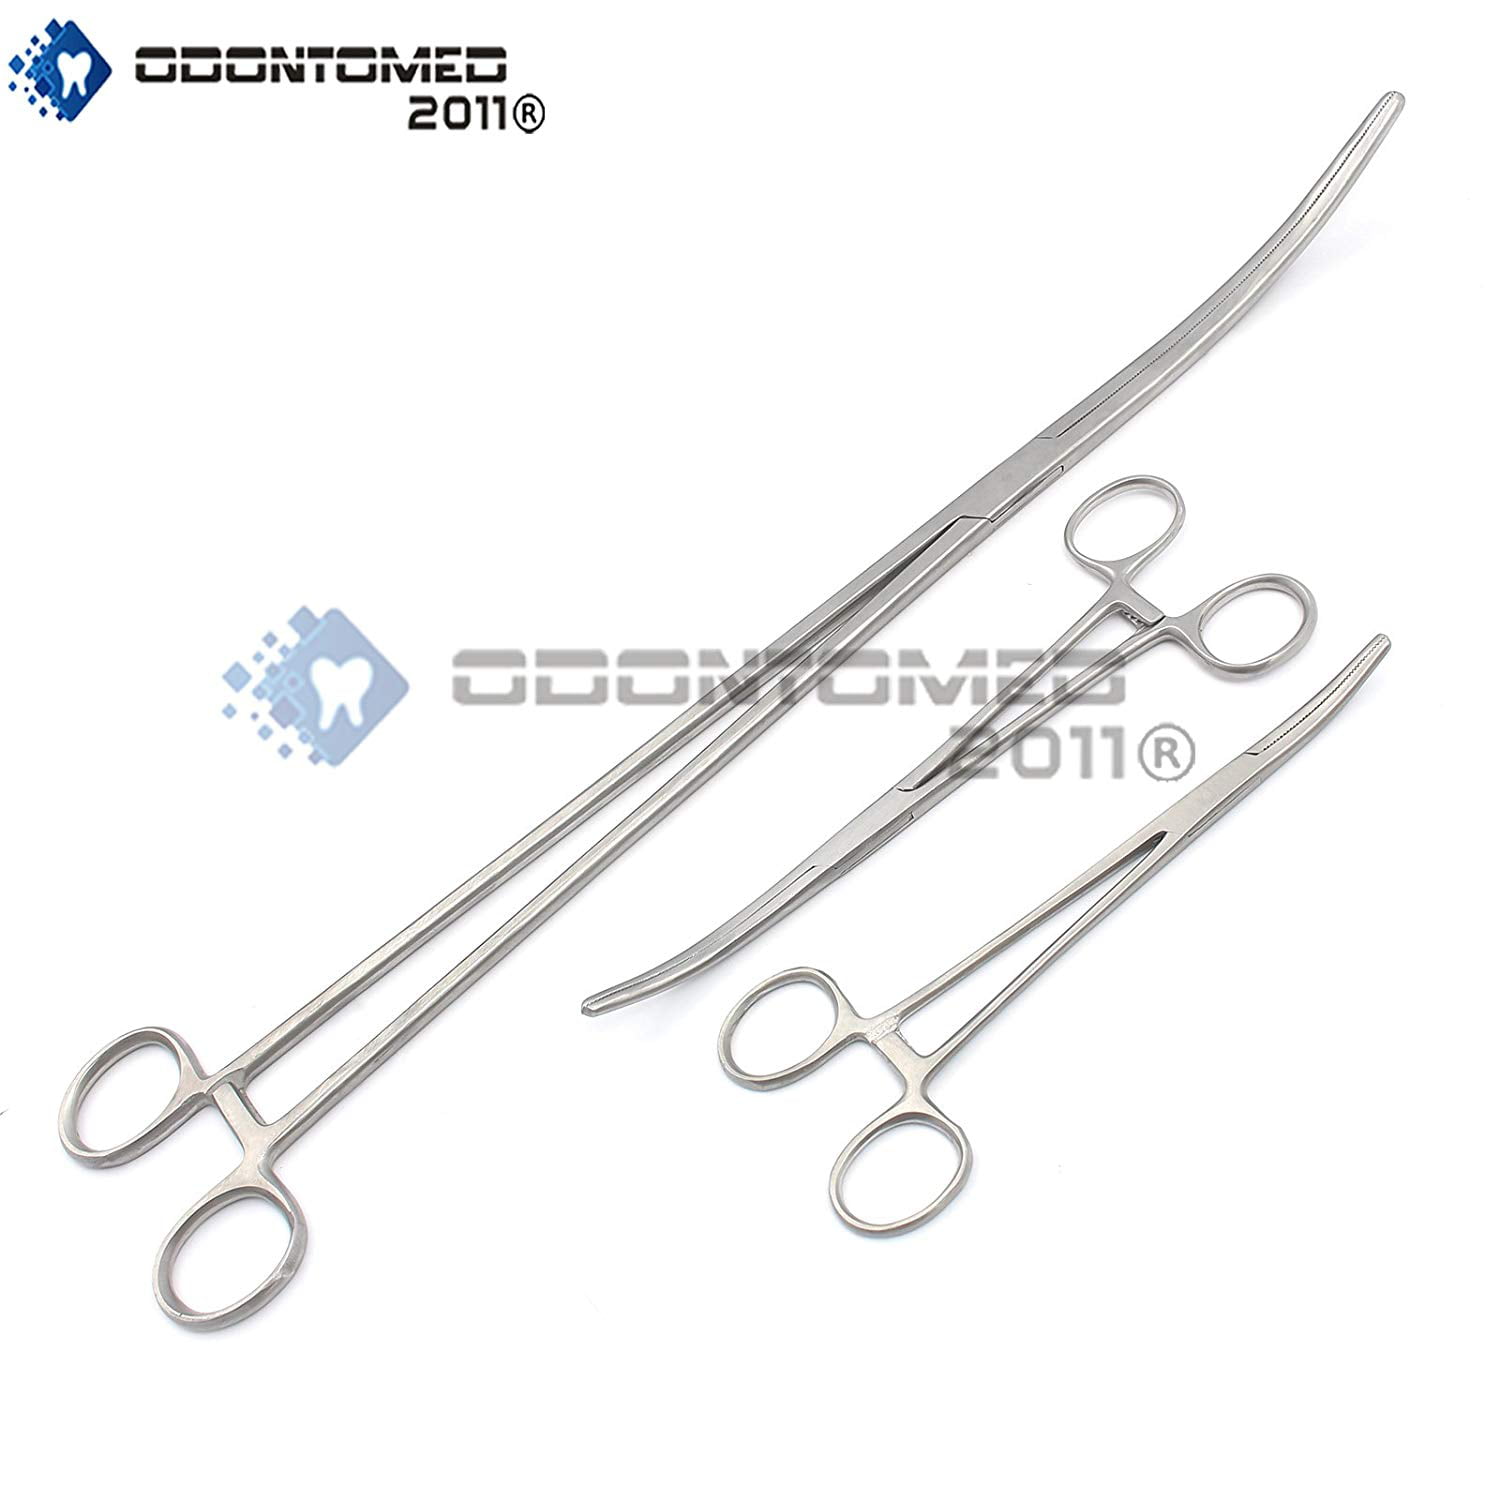 OdontoMed2011 5 SELF LOCKING CURVED FORCEPS STAINLESS STEEL QUALITY INSTRUMENTS